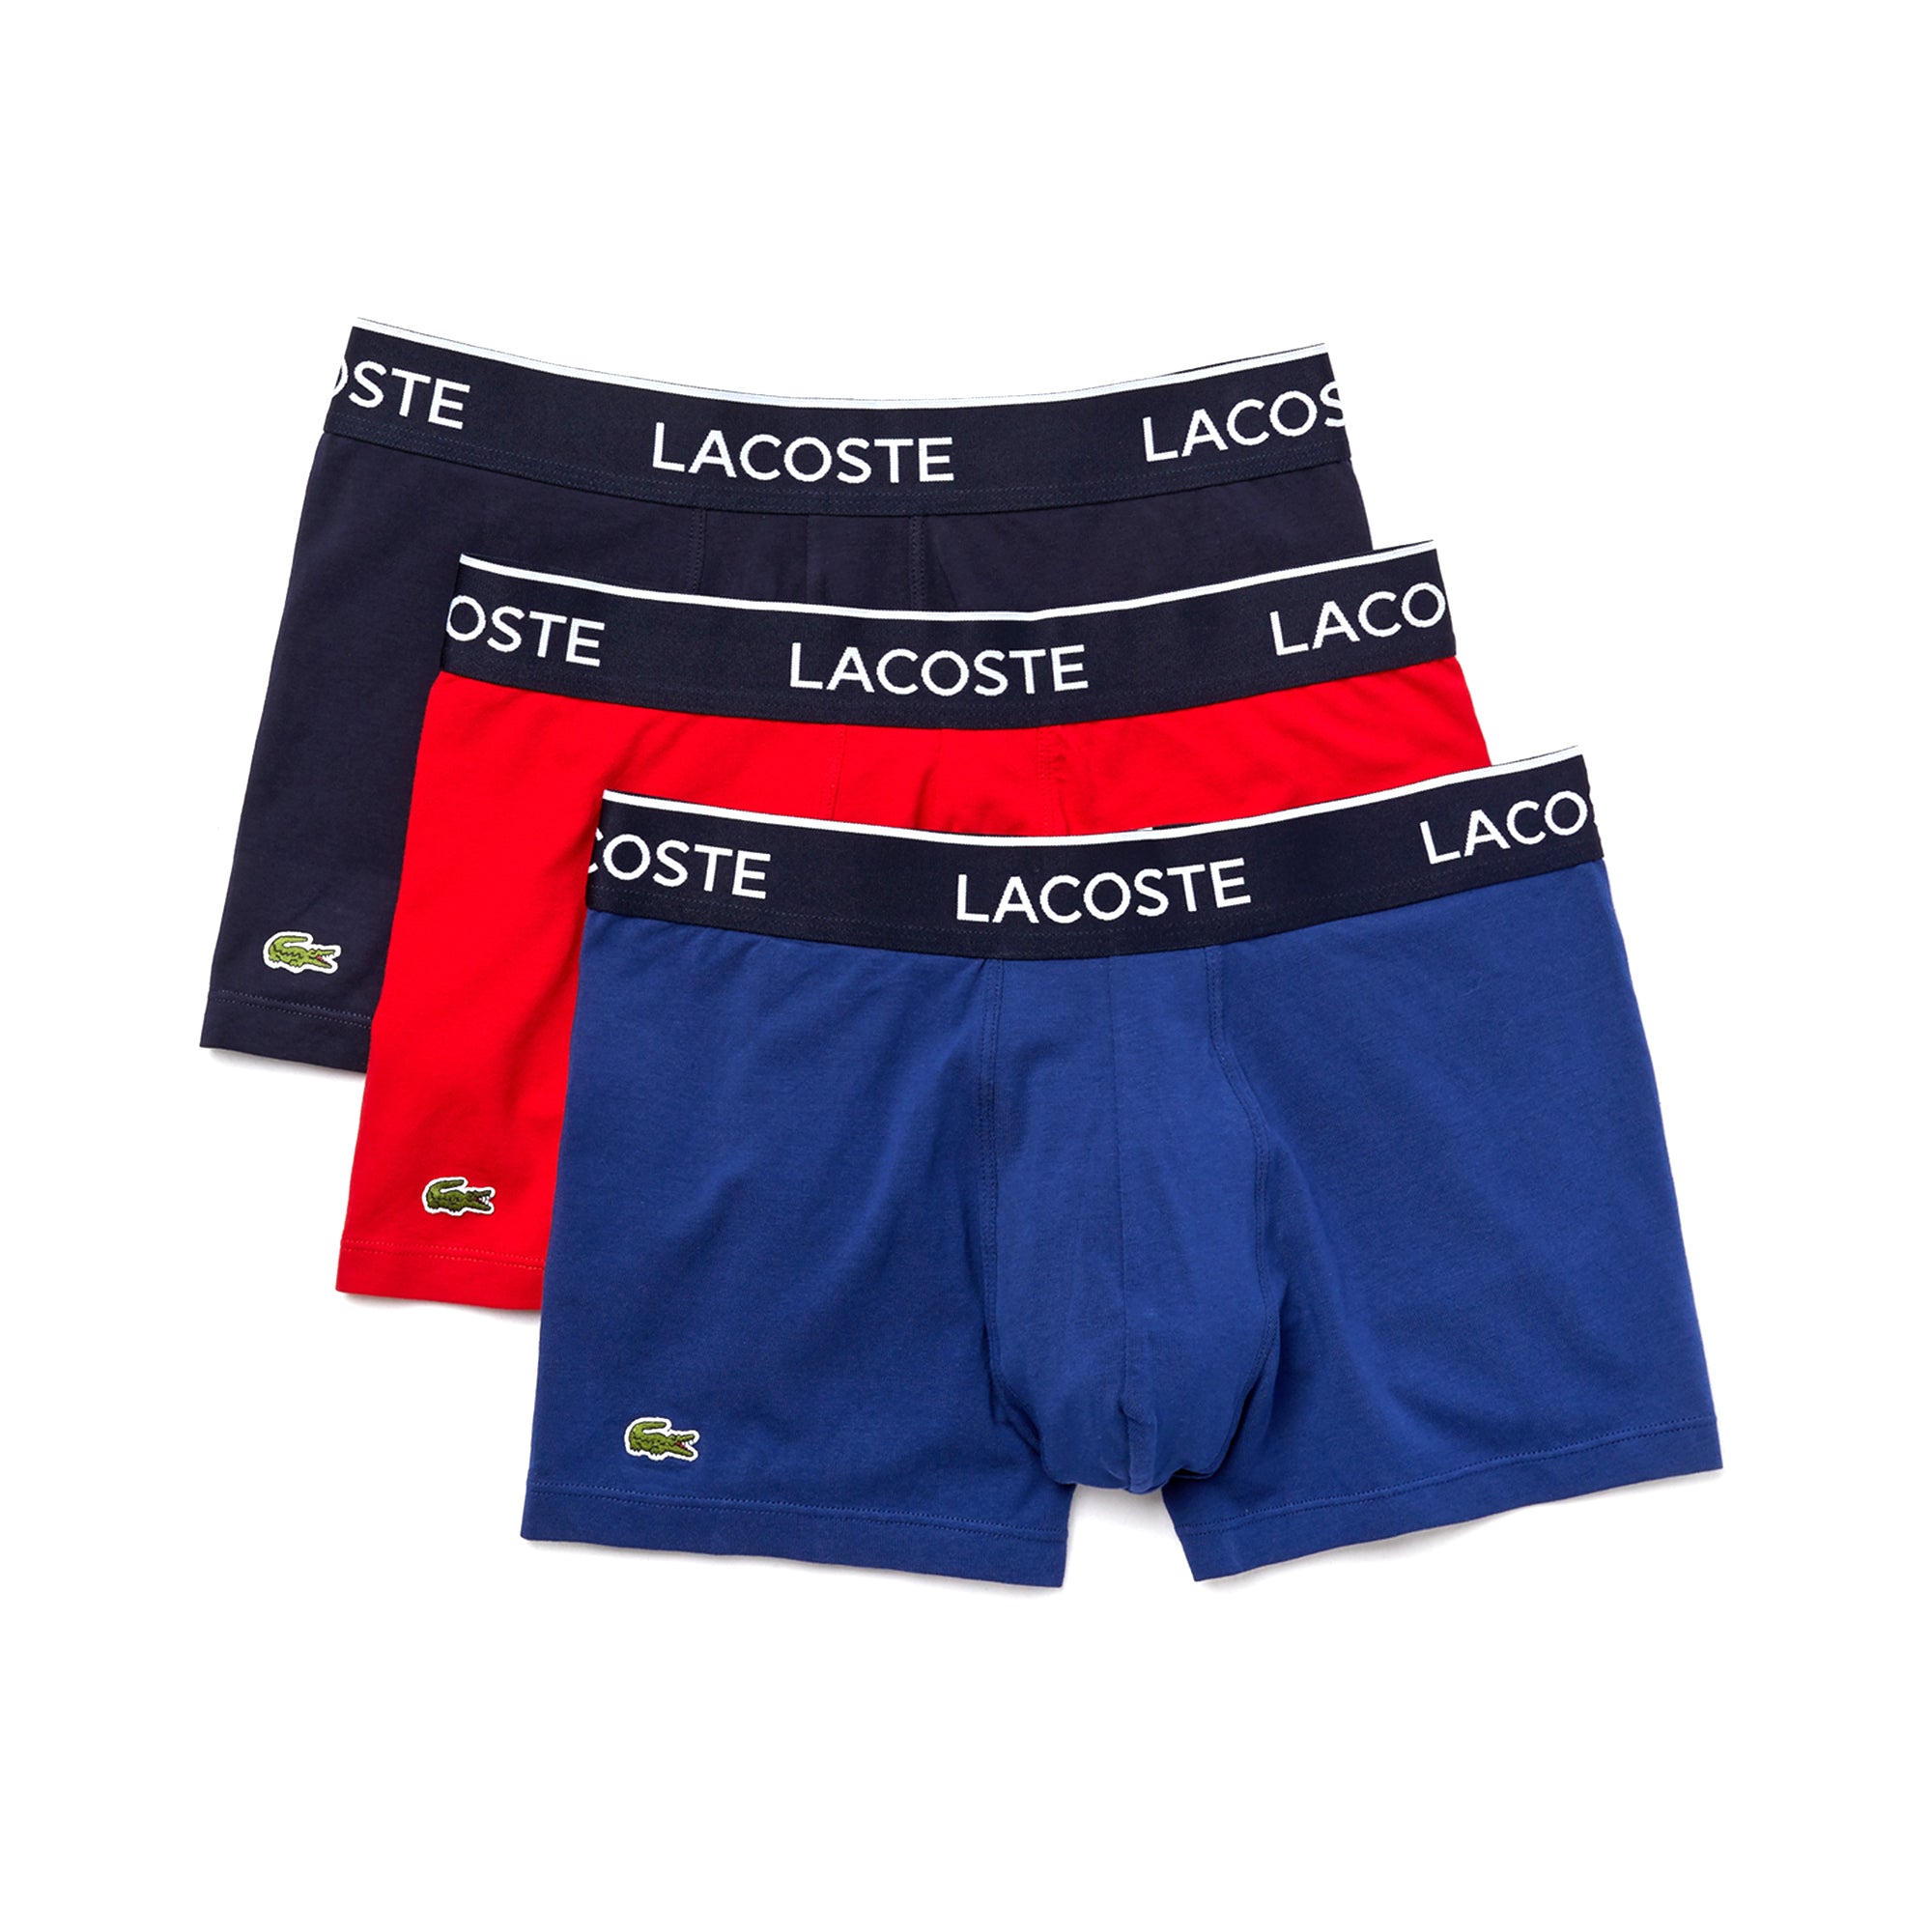 lacoste-cotton-stretch-trunk-3-pack-5h3389-navy-red-royal-w64